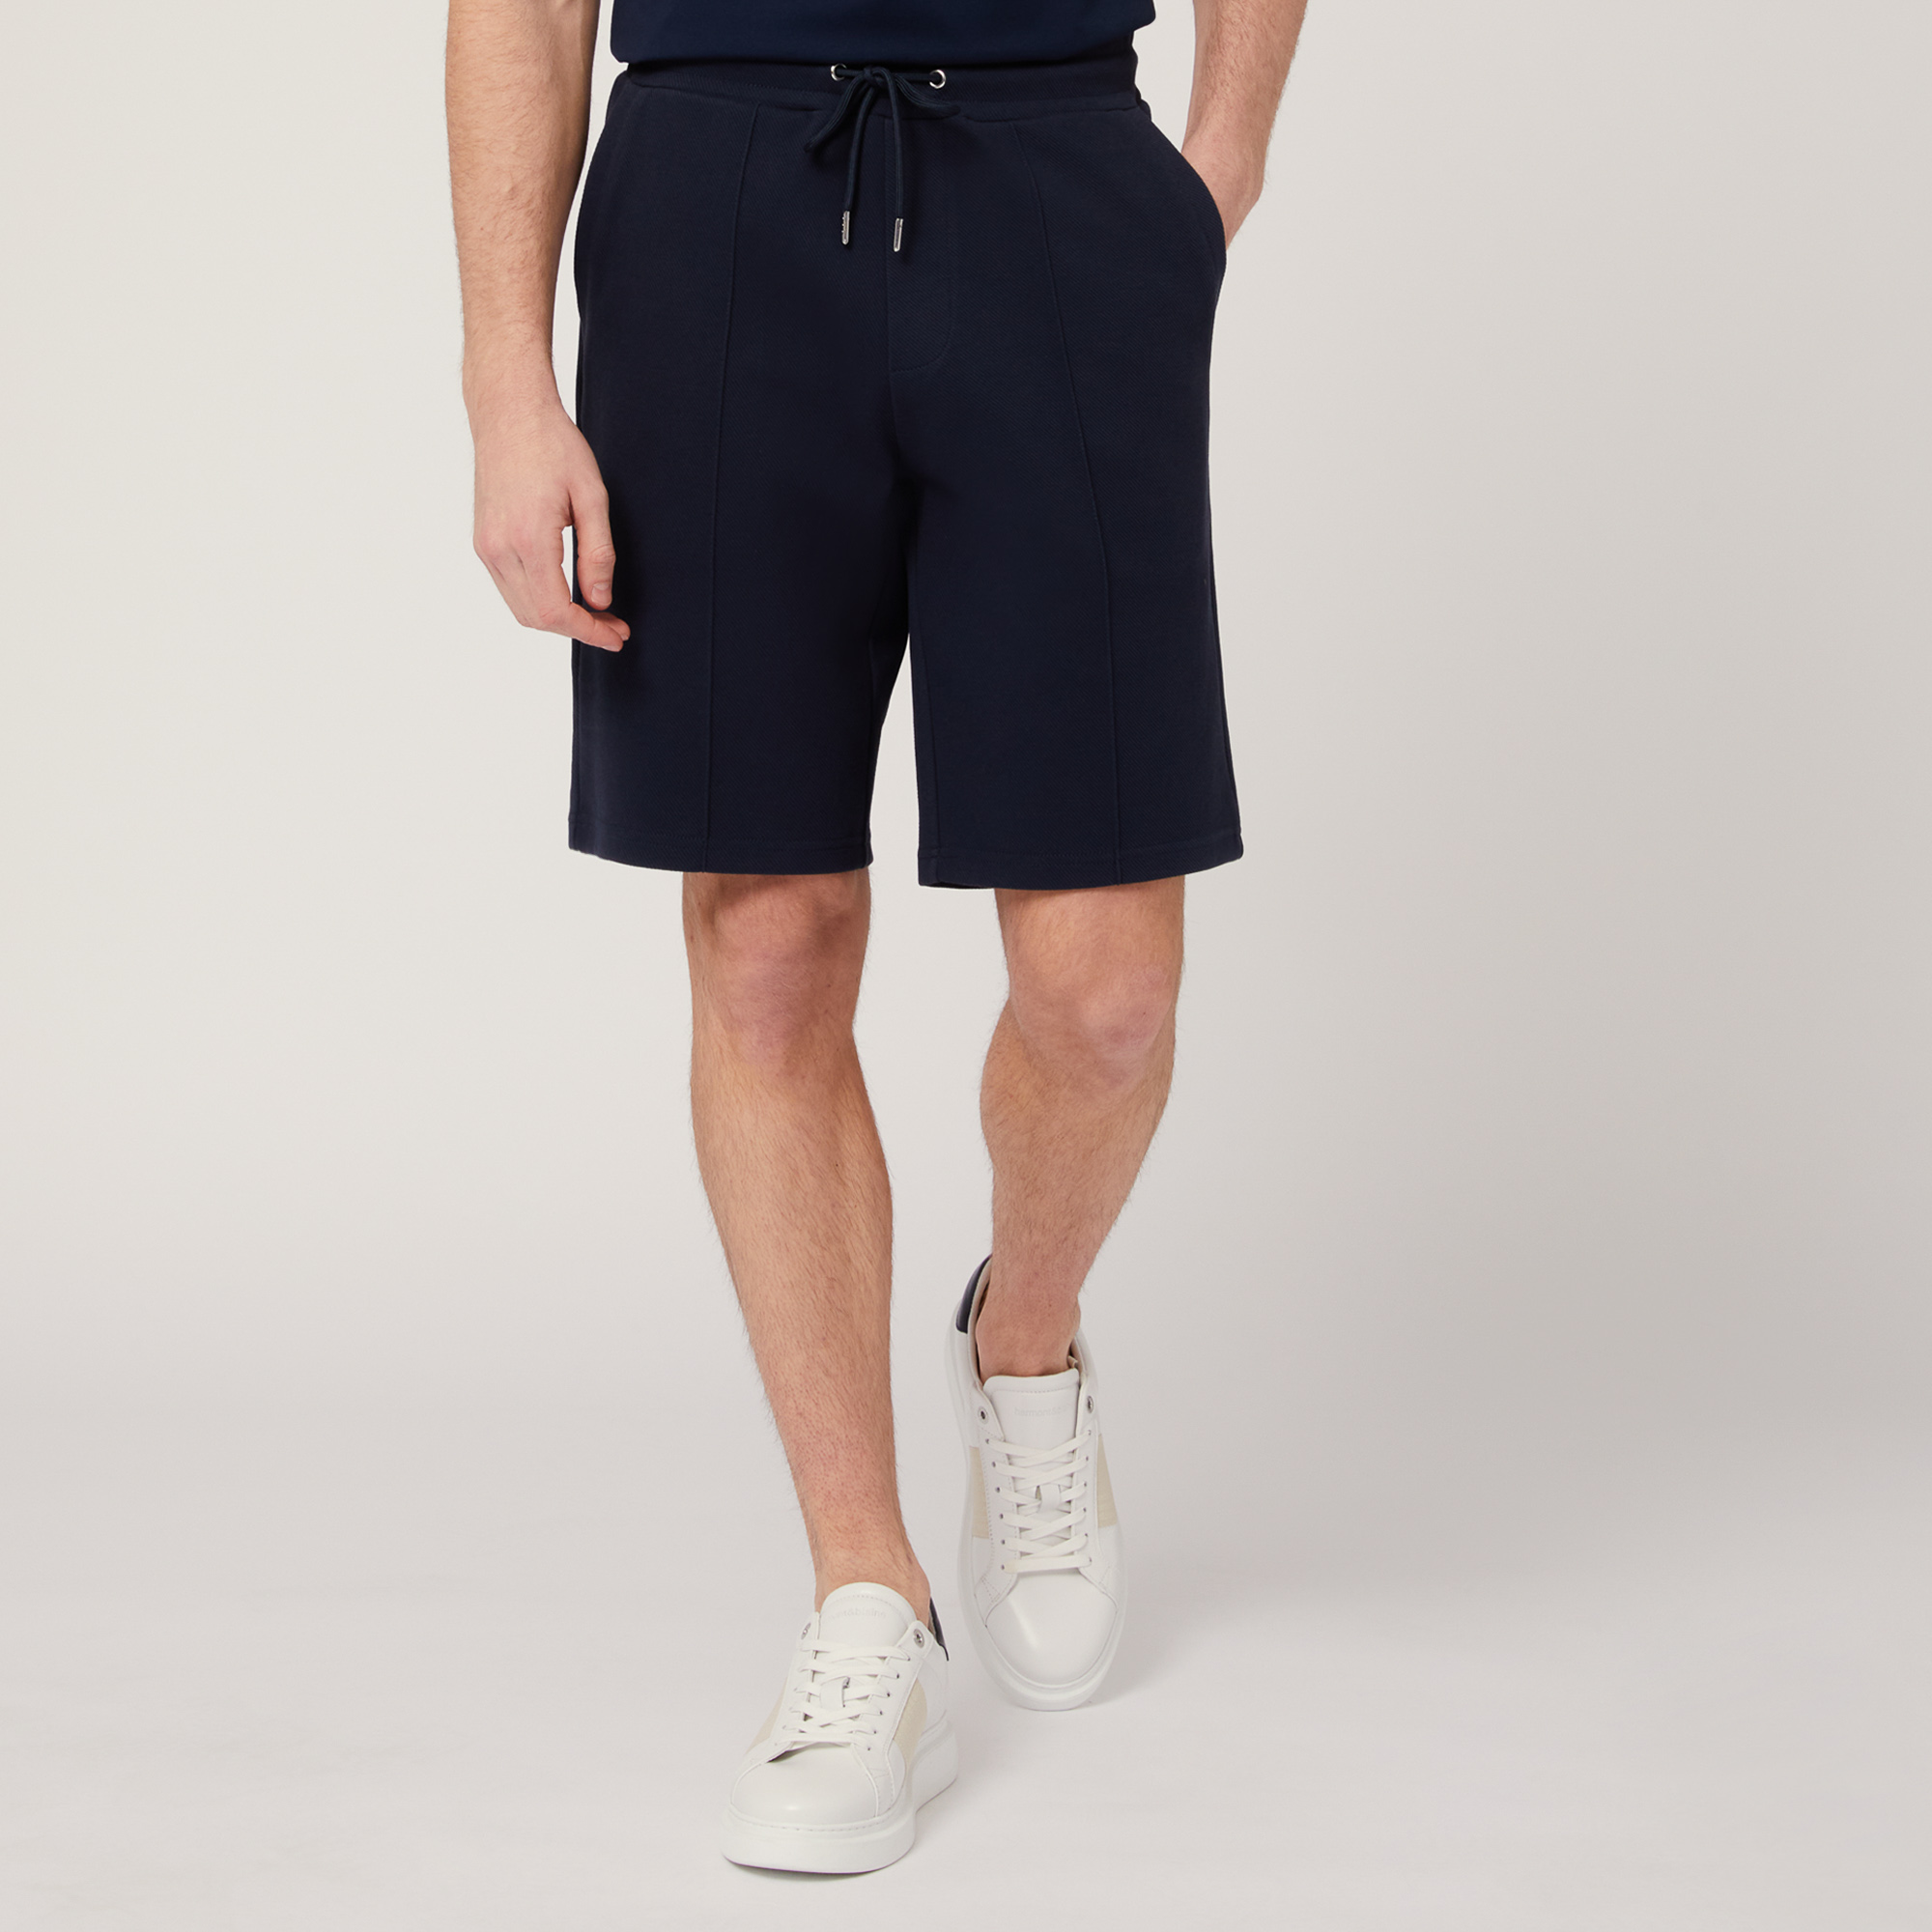 Shorts In Cotone Stretch Con Tasca Posteriore, Blu Navy, large image number 0